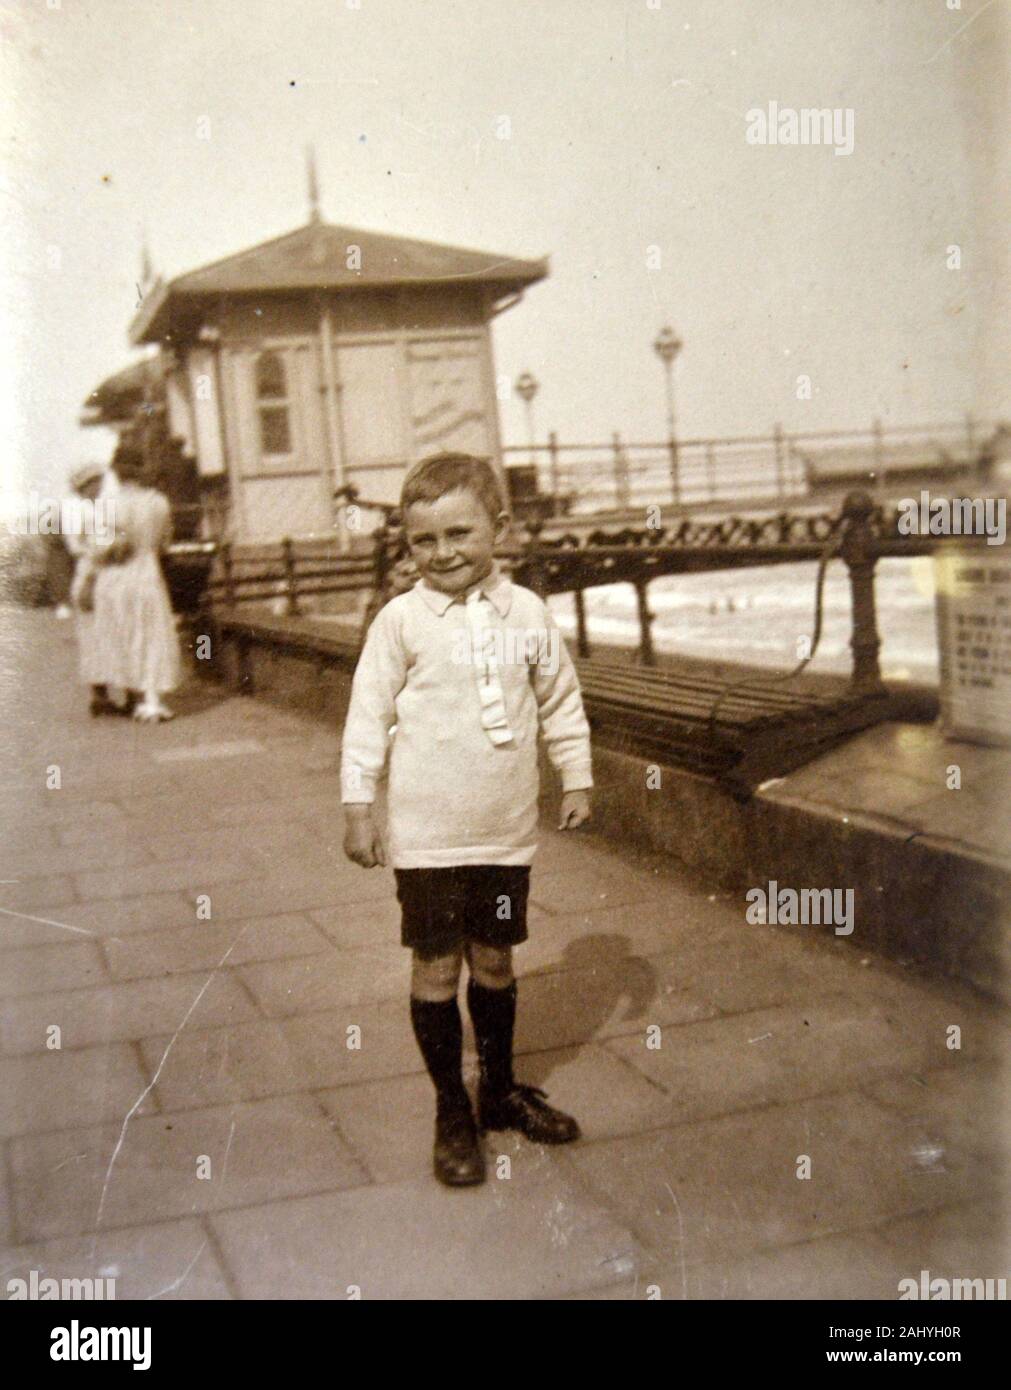 Old vintage black and white photograph of a young boy standing in front of a seaside pier Stock Photo